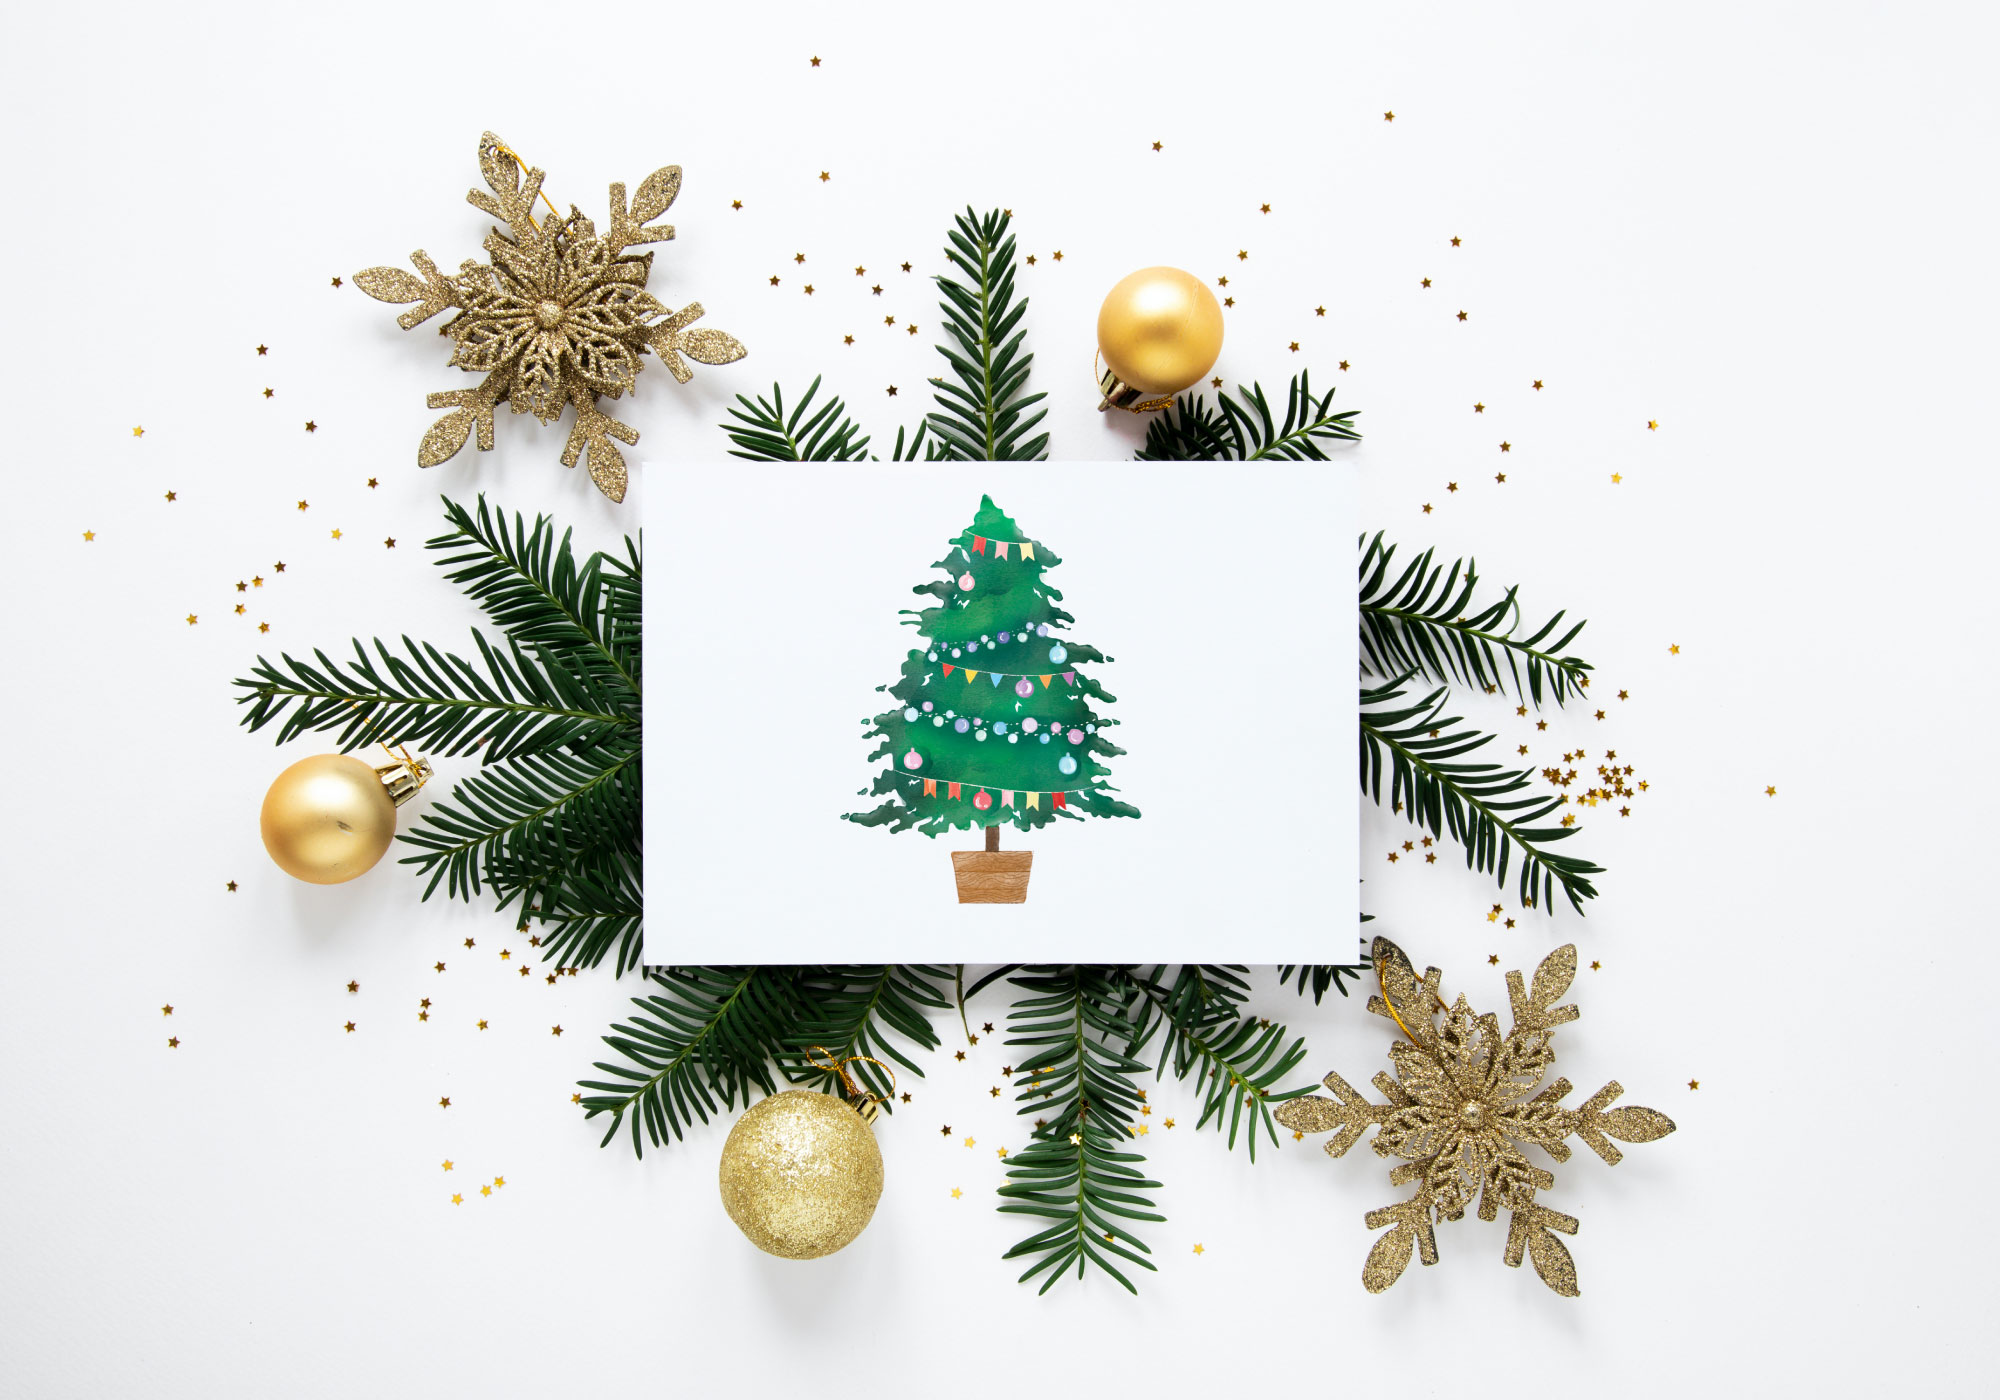 Free Watercolor Christmas Tree Graphic